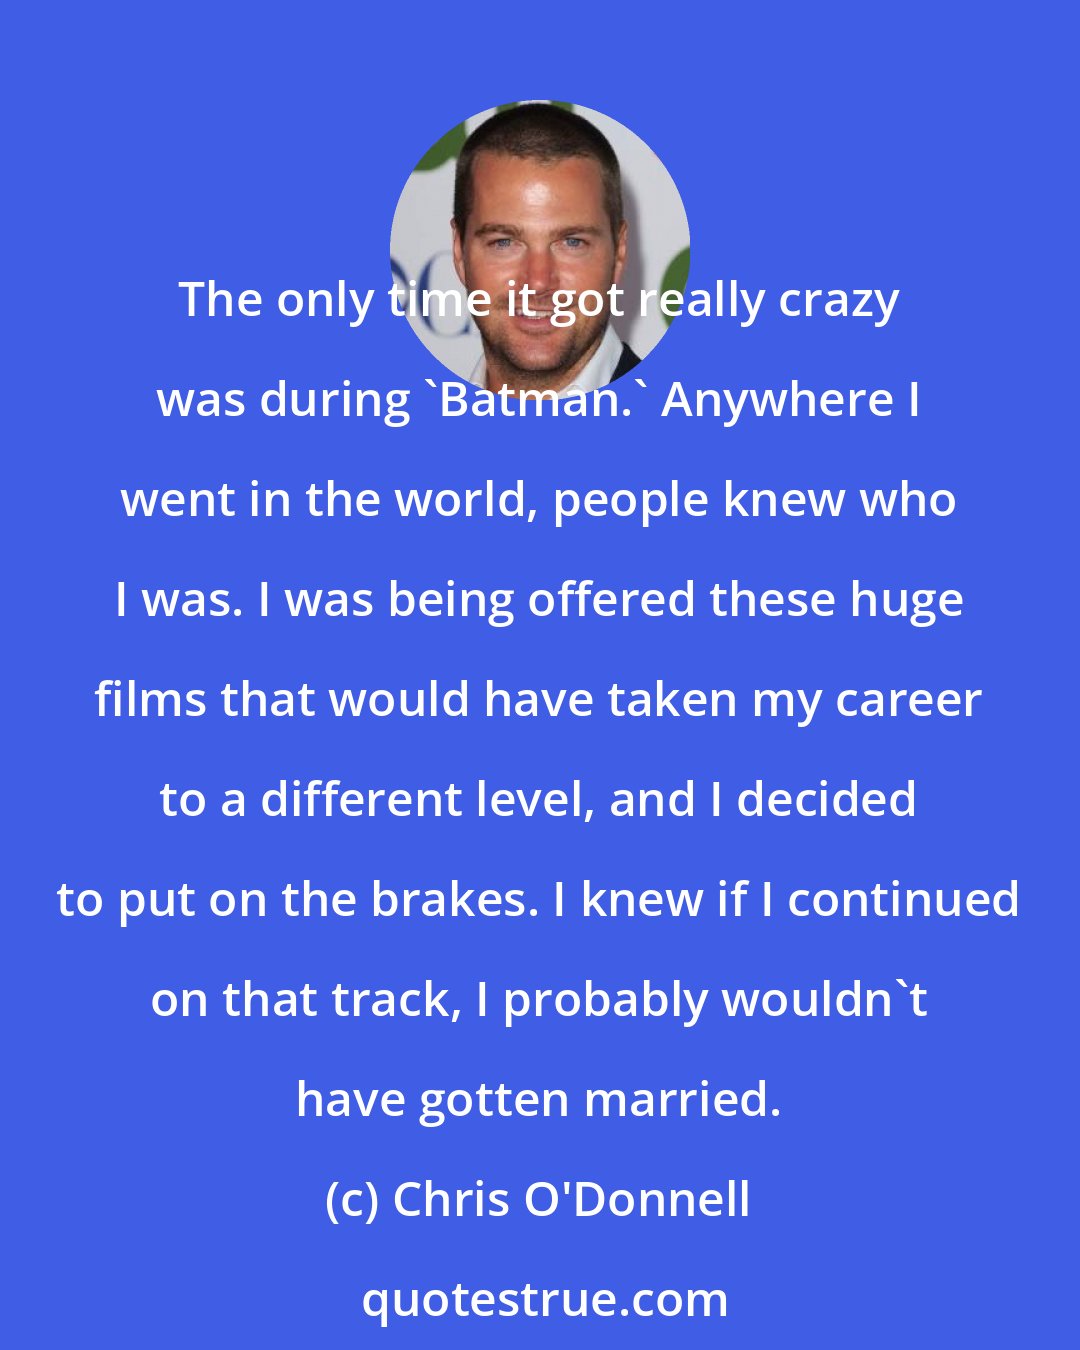 Chris O'Donnell: The only time it got really crazy was during 'Batman.' Anywhere I went in the world, people knew who I was. I was being offered these huge films that would have taken my career to a different level, and I decided to put on the brakes. I knew if I continued on that track, I probably wouldn't have gotten married.